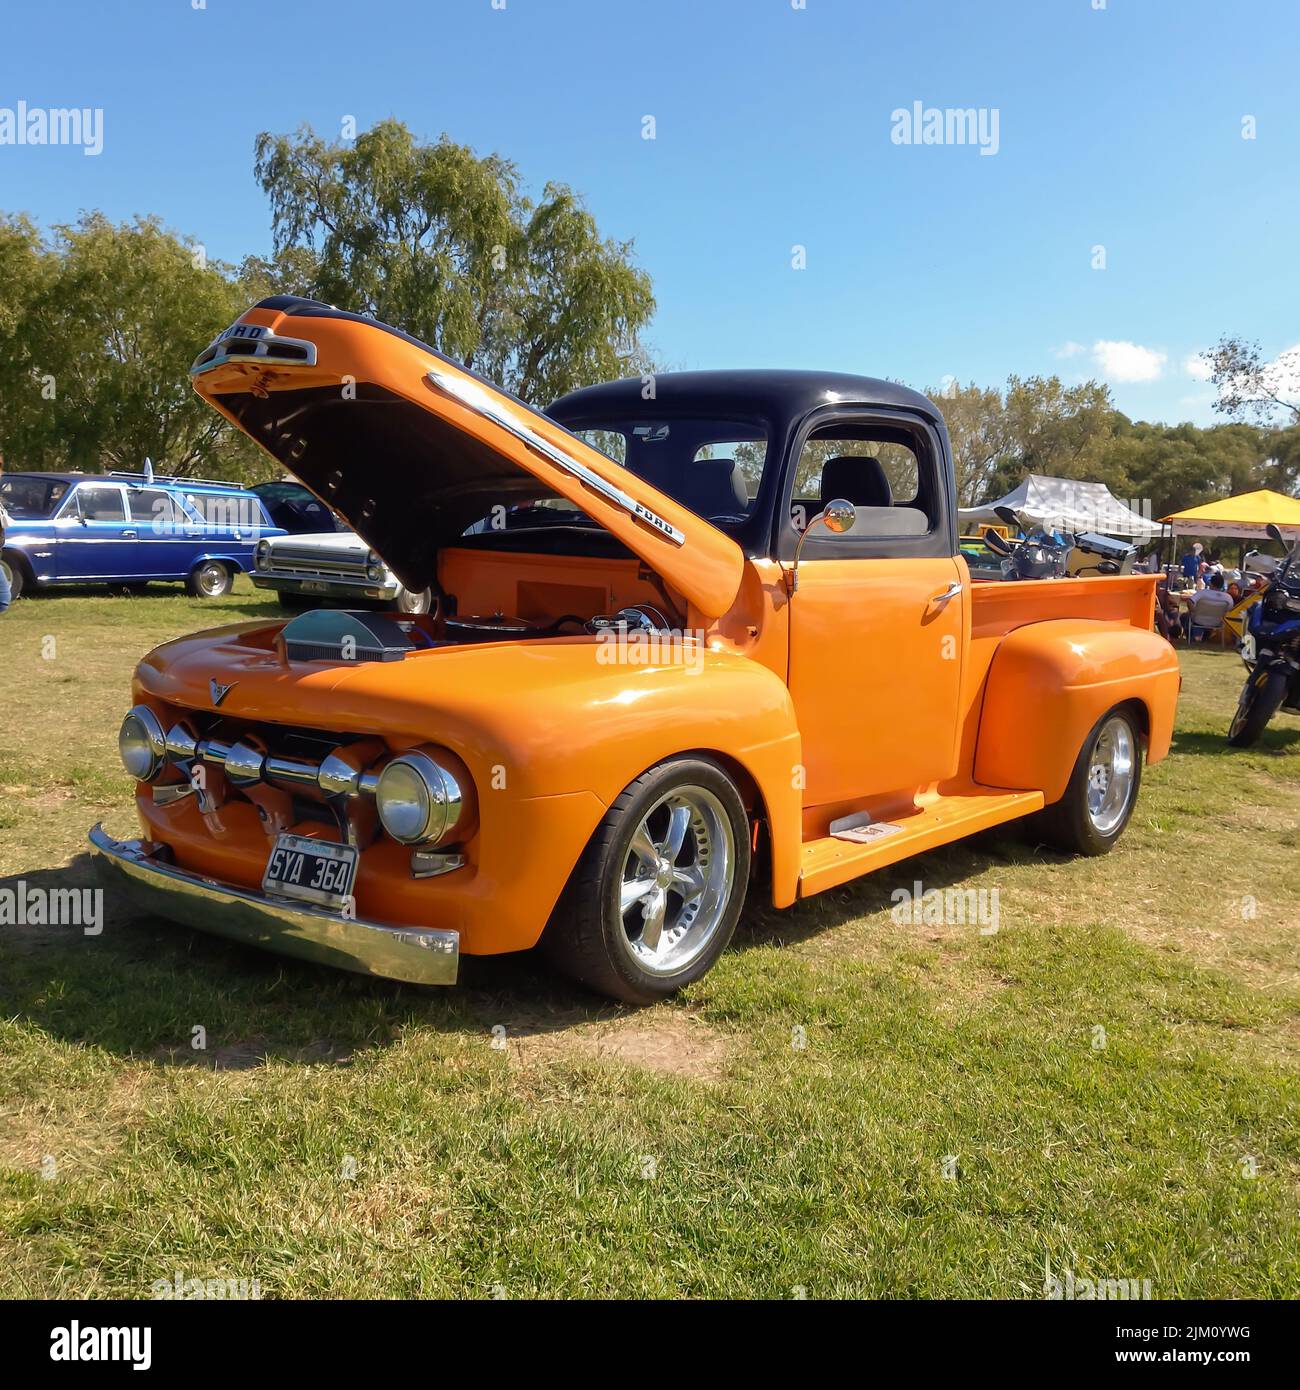 Chascomus, Argentina - Apr 09, 2022: Old orange utility pickup truck Ford F 1 1950s in the countryside. Open hood. Nature grass and trees. Classic car Stock Photo